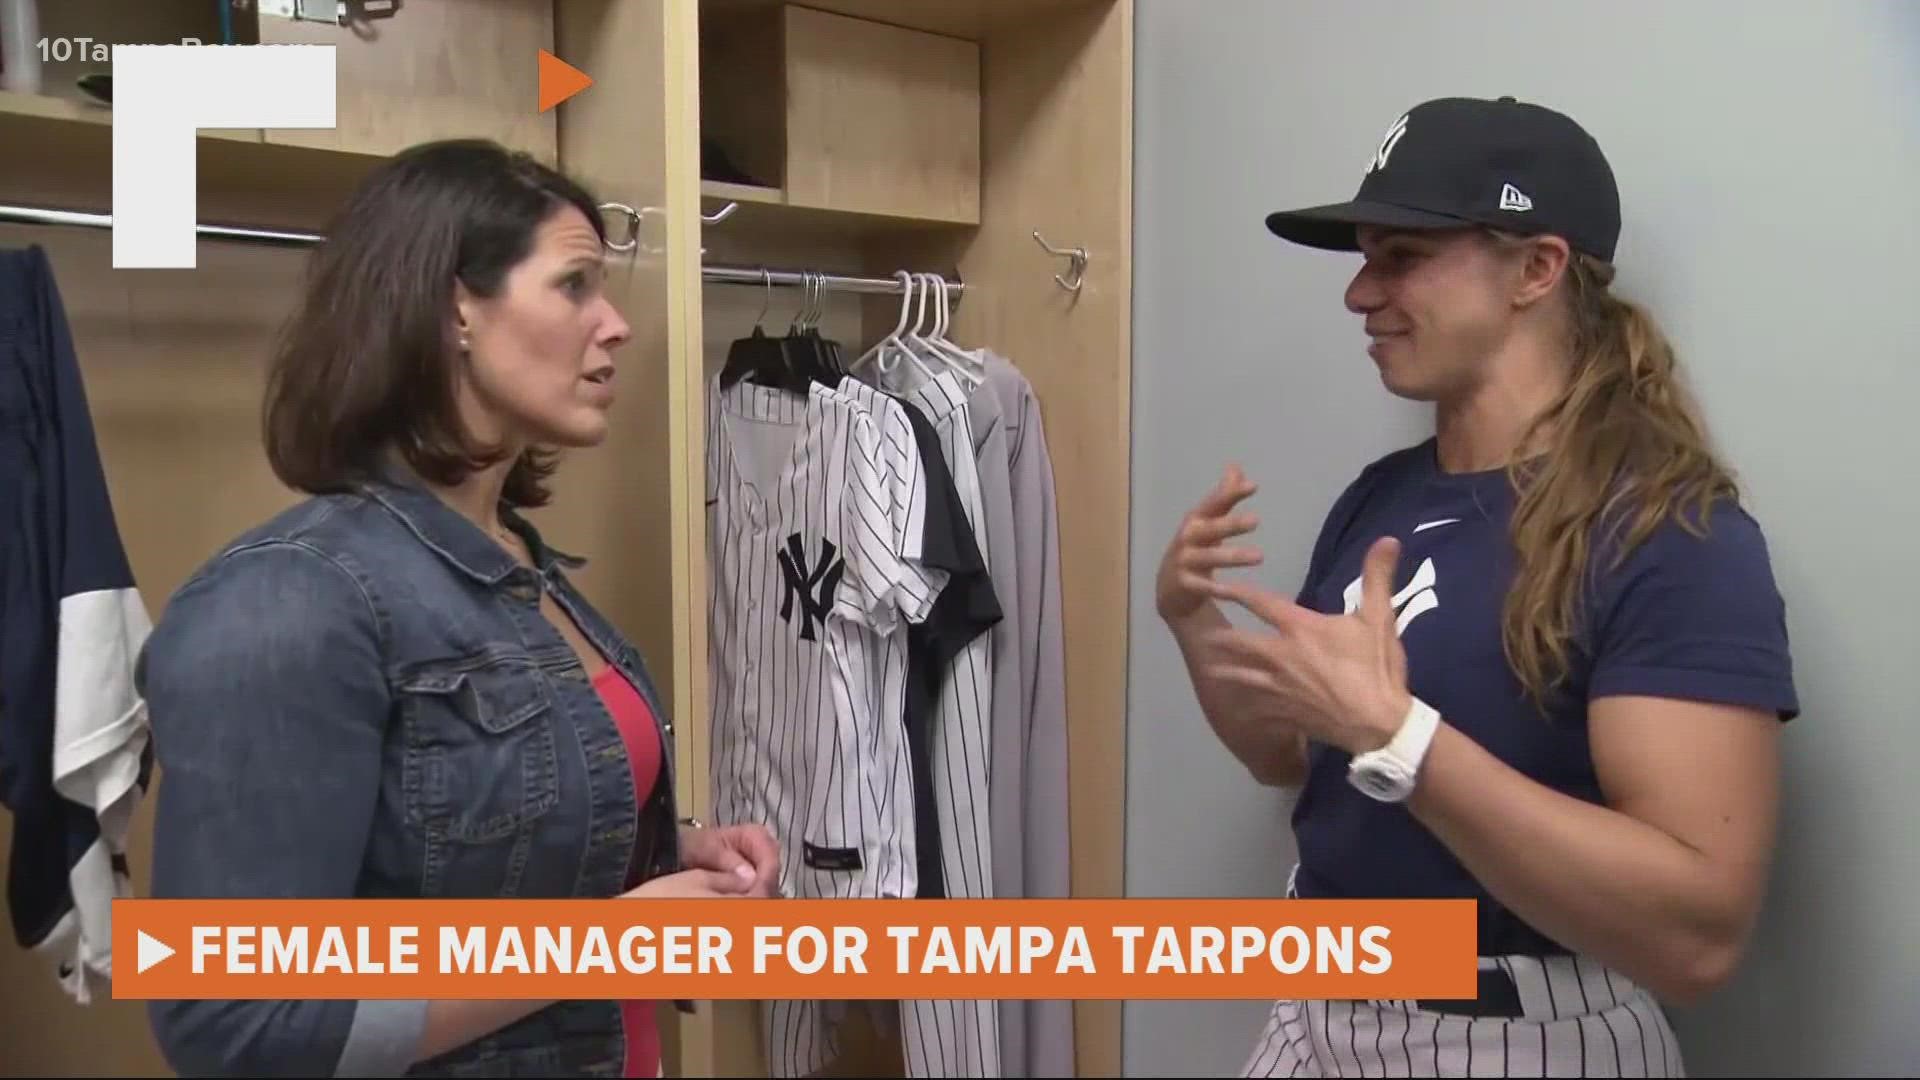 Fans cheer as first female manager in the minors, Rachel Balkovec, leads  Tarpons to win in debut